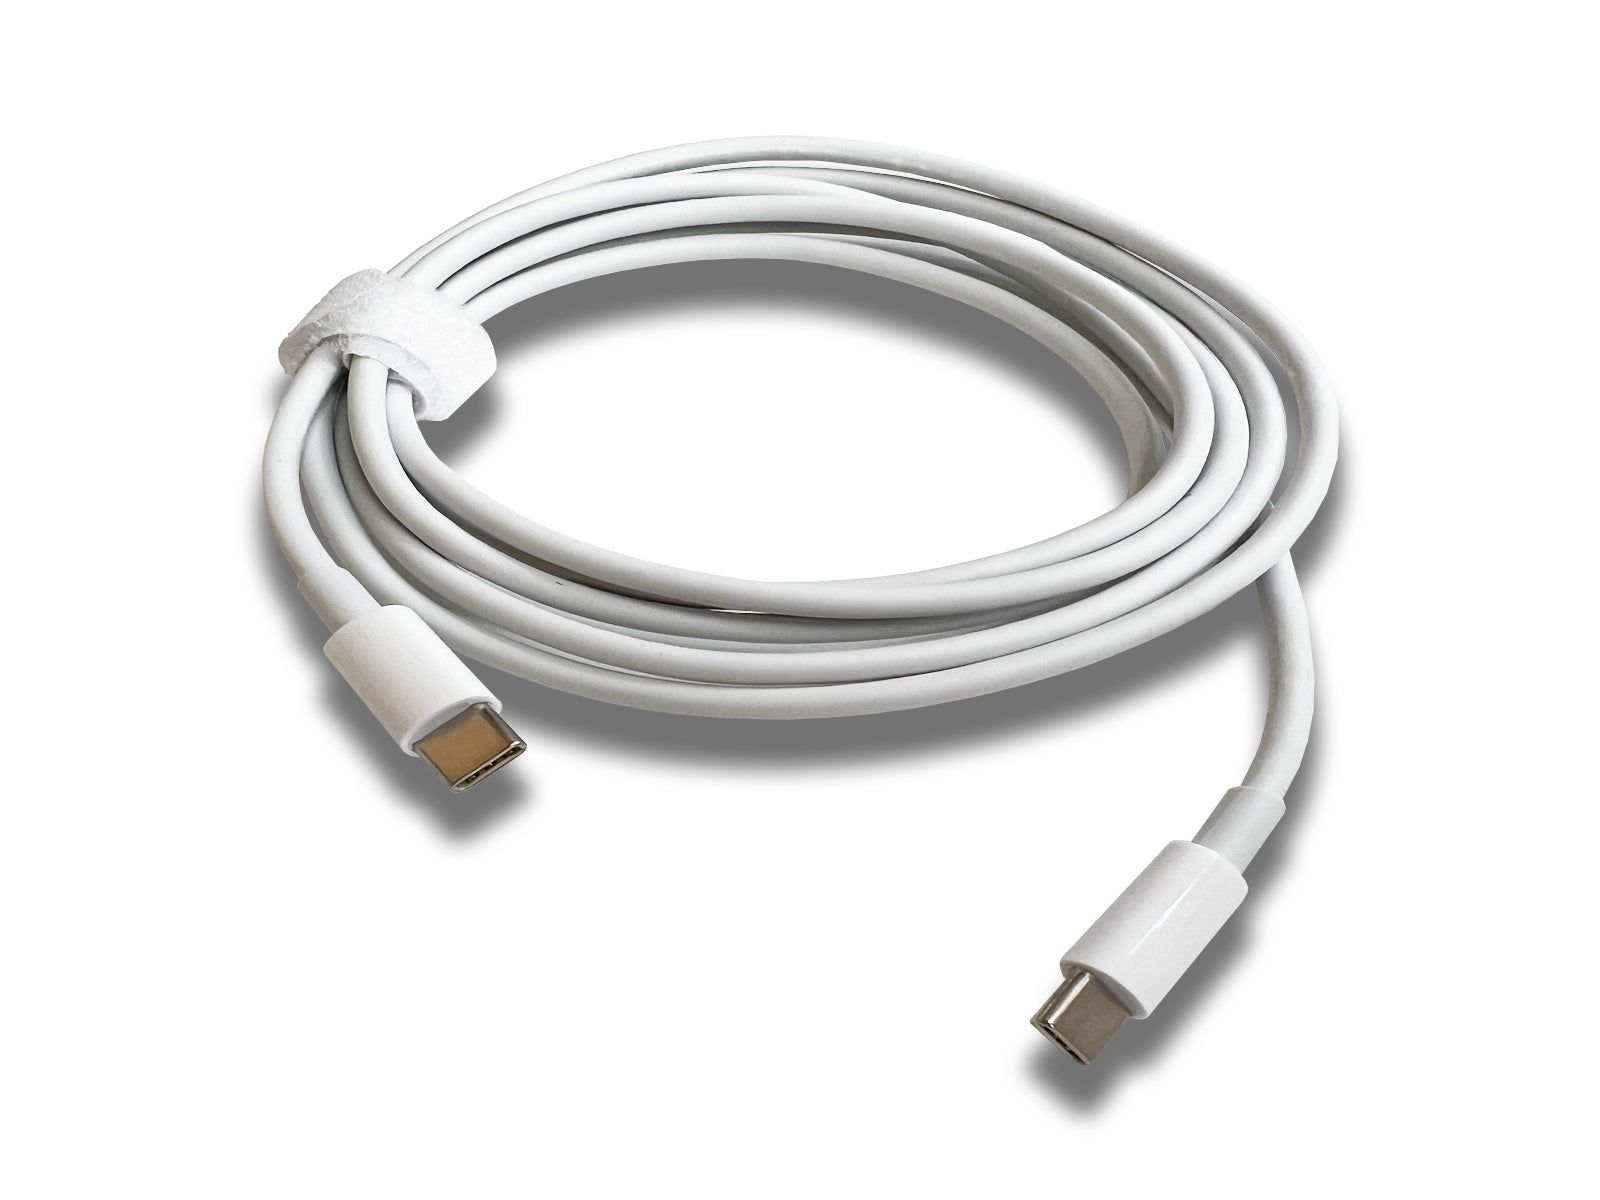 Image-of-the-usb-c-to-usb-c-cable-on-the-white-background